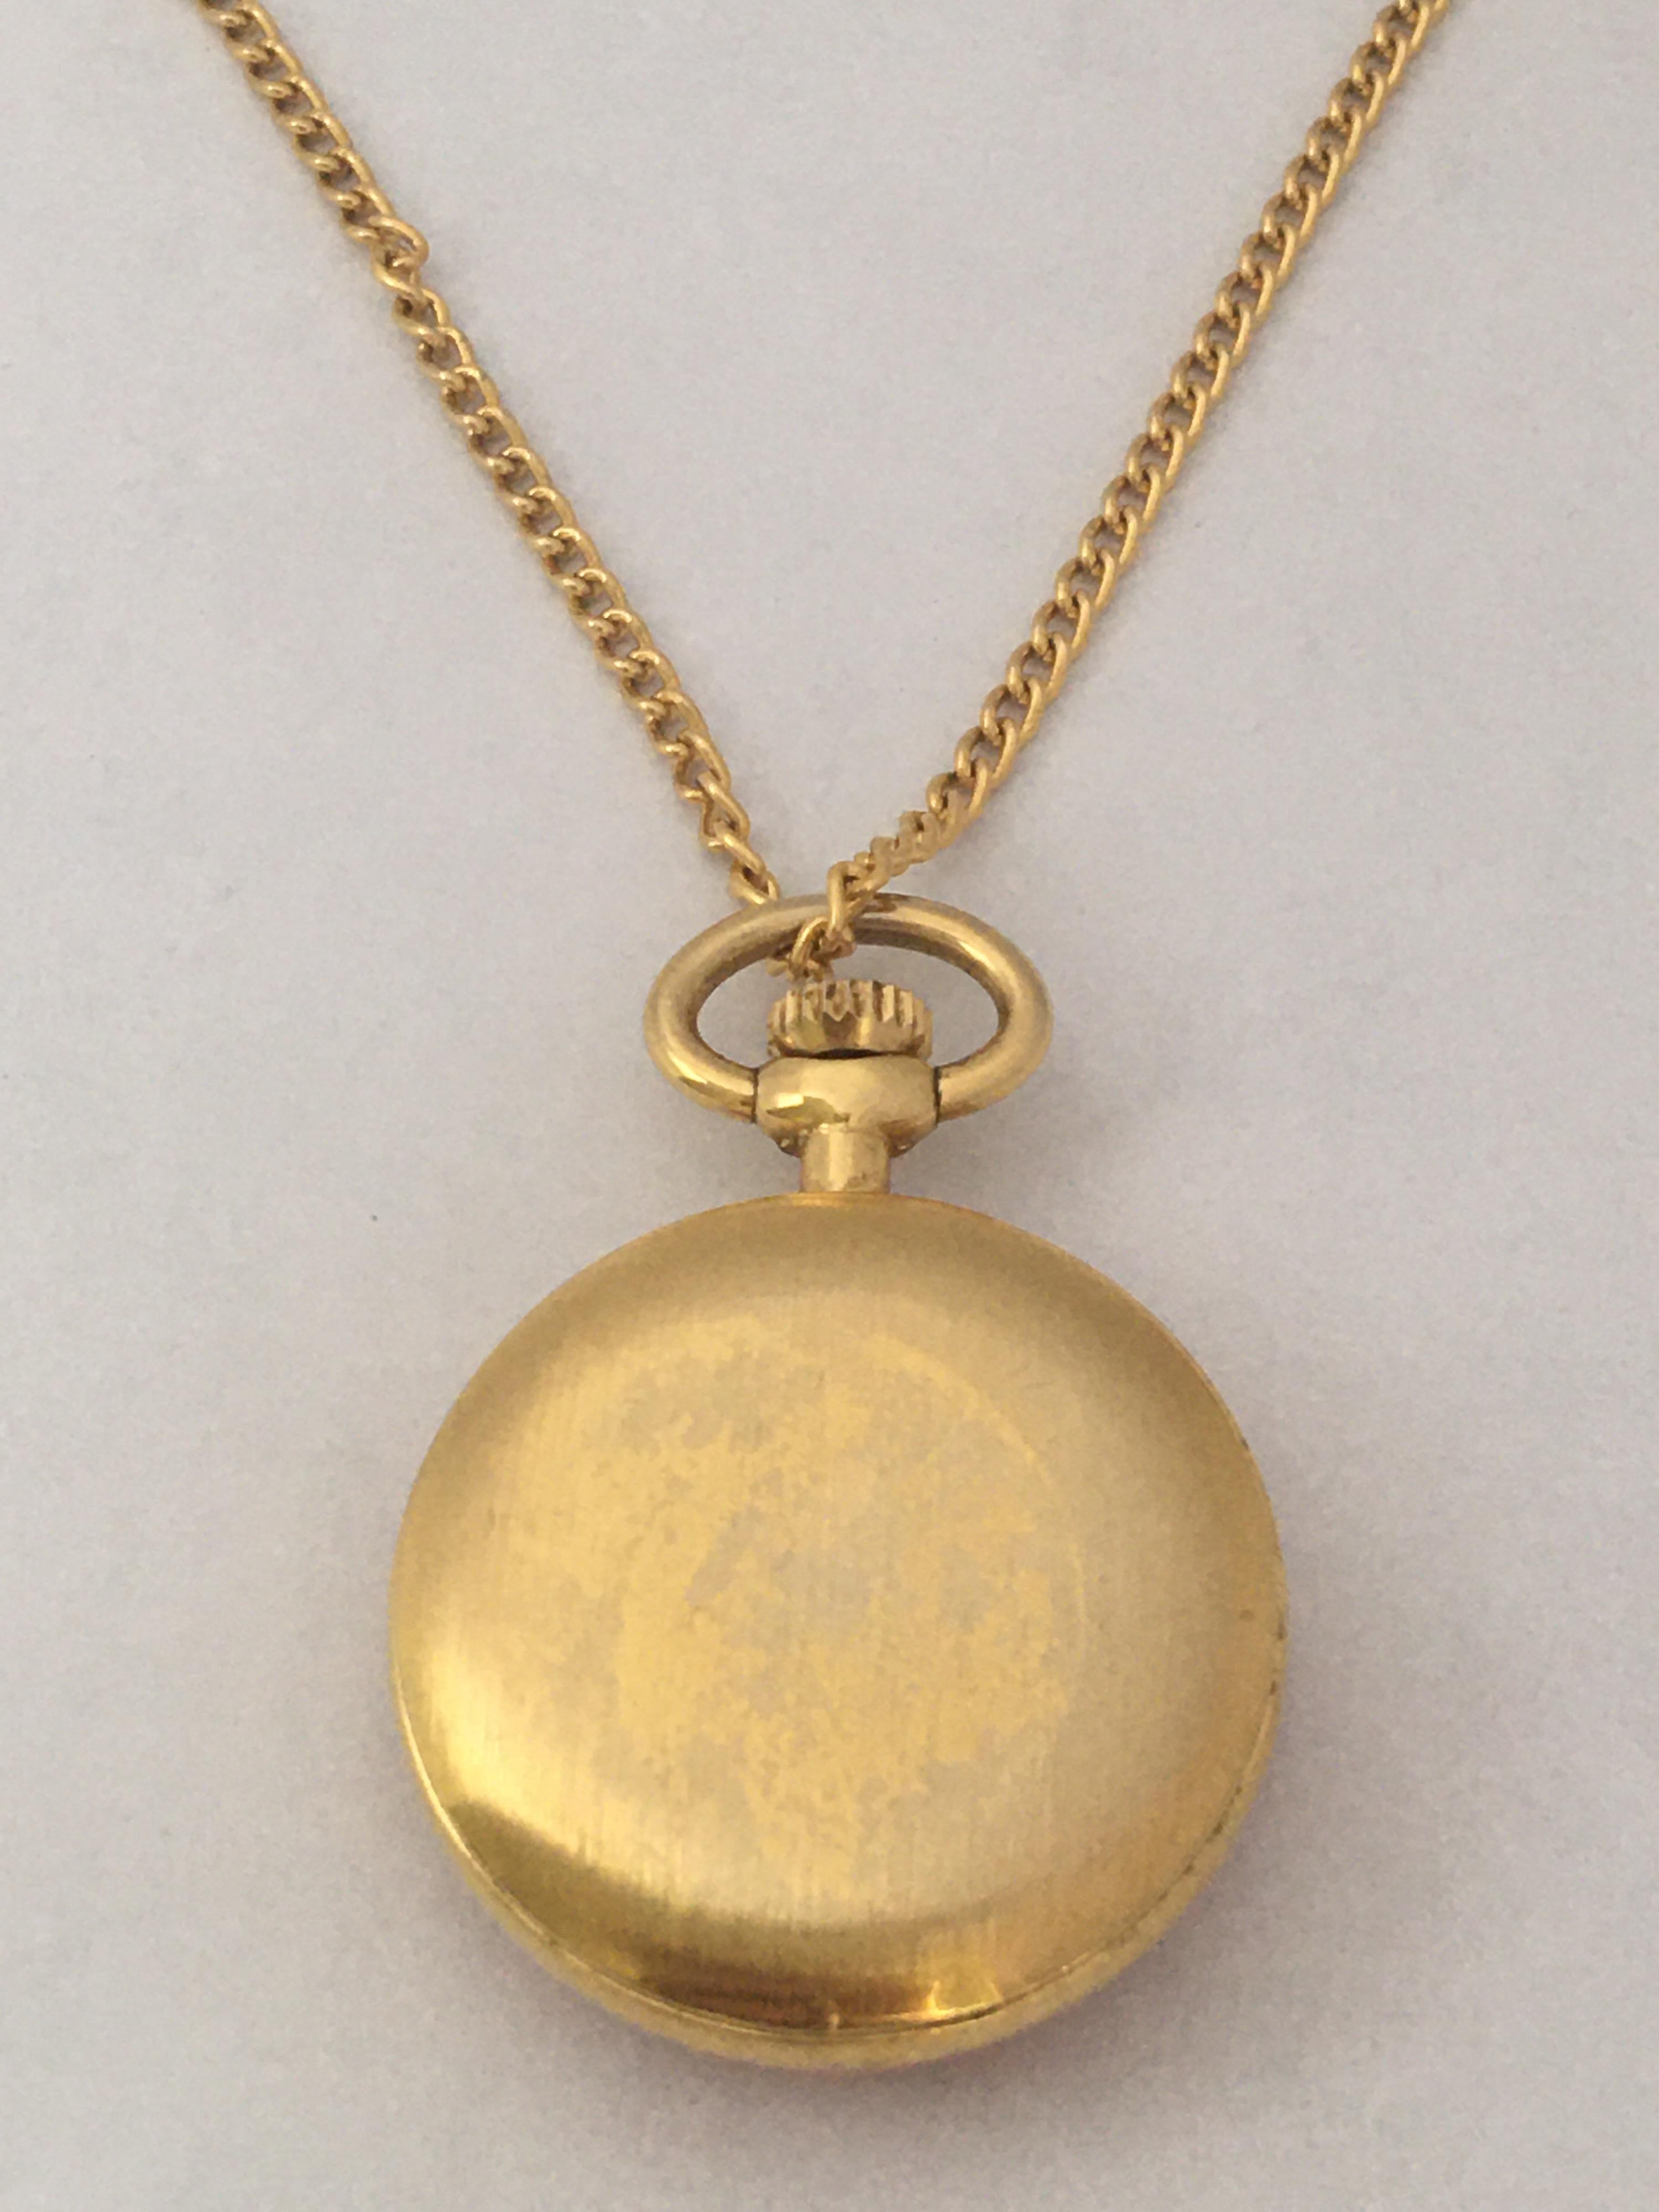 This beautiful vintage hand winding pendant/ pocket watch is in good working condition and it is running well. Visible signs of ageing and wear with the gold plated case is a bit tarnished as shown. It comes with a gold plated necklace/ chain 